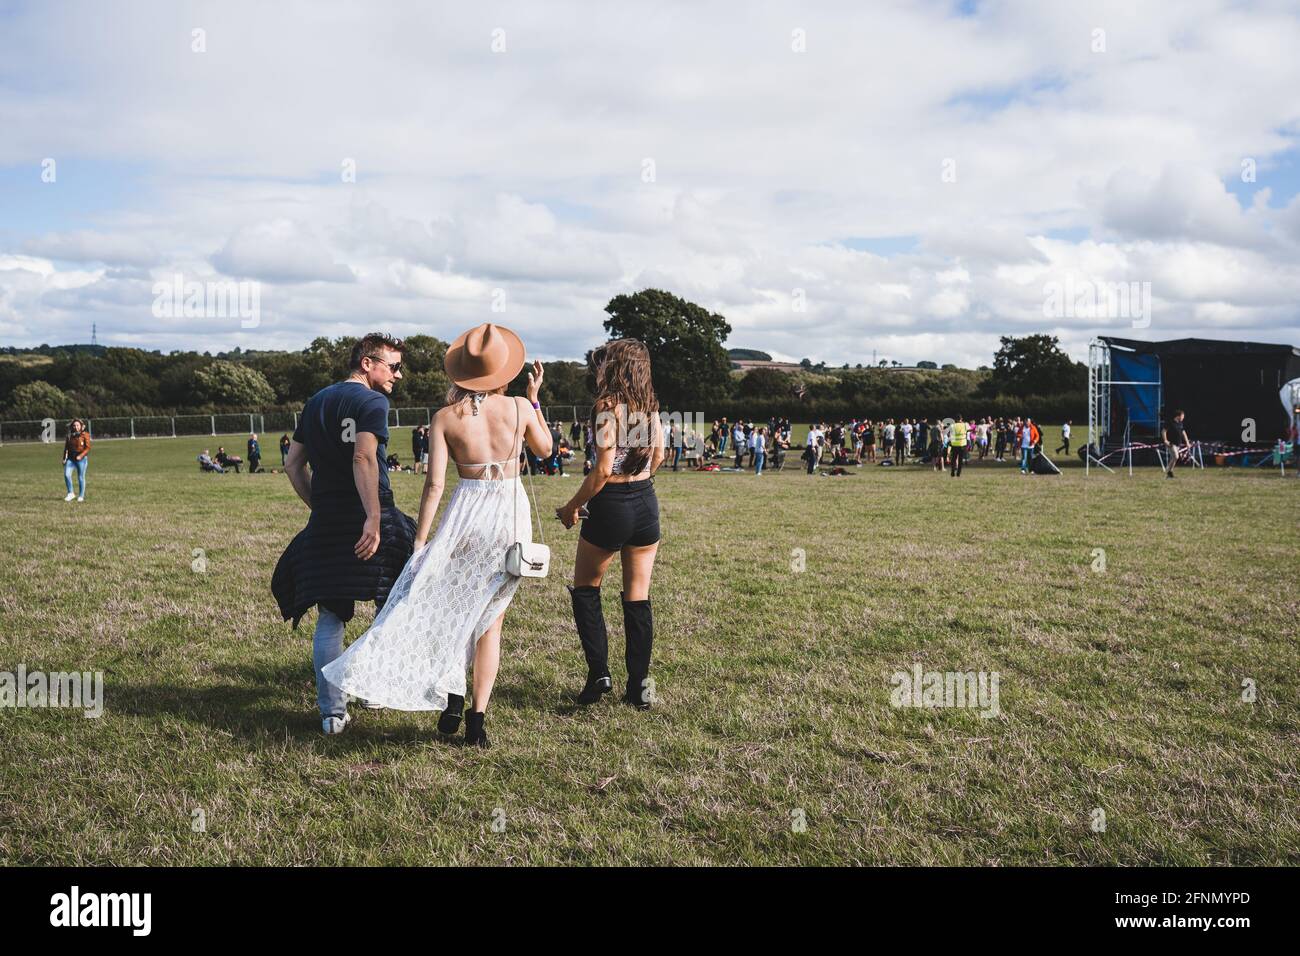 Open air electronic music festival with social distancing measures near Birmingham, the UK Stock Photo